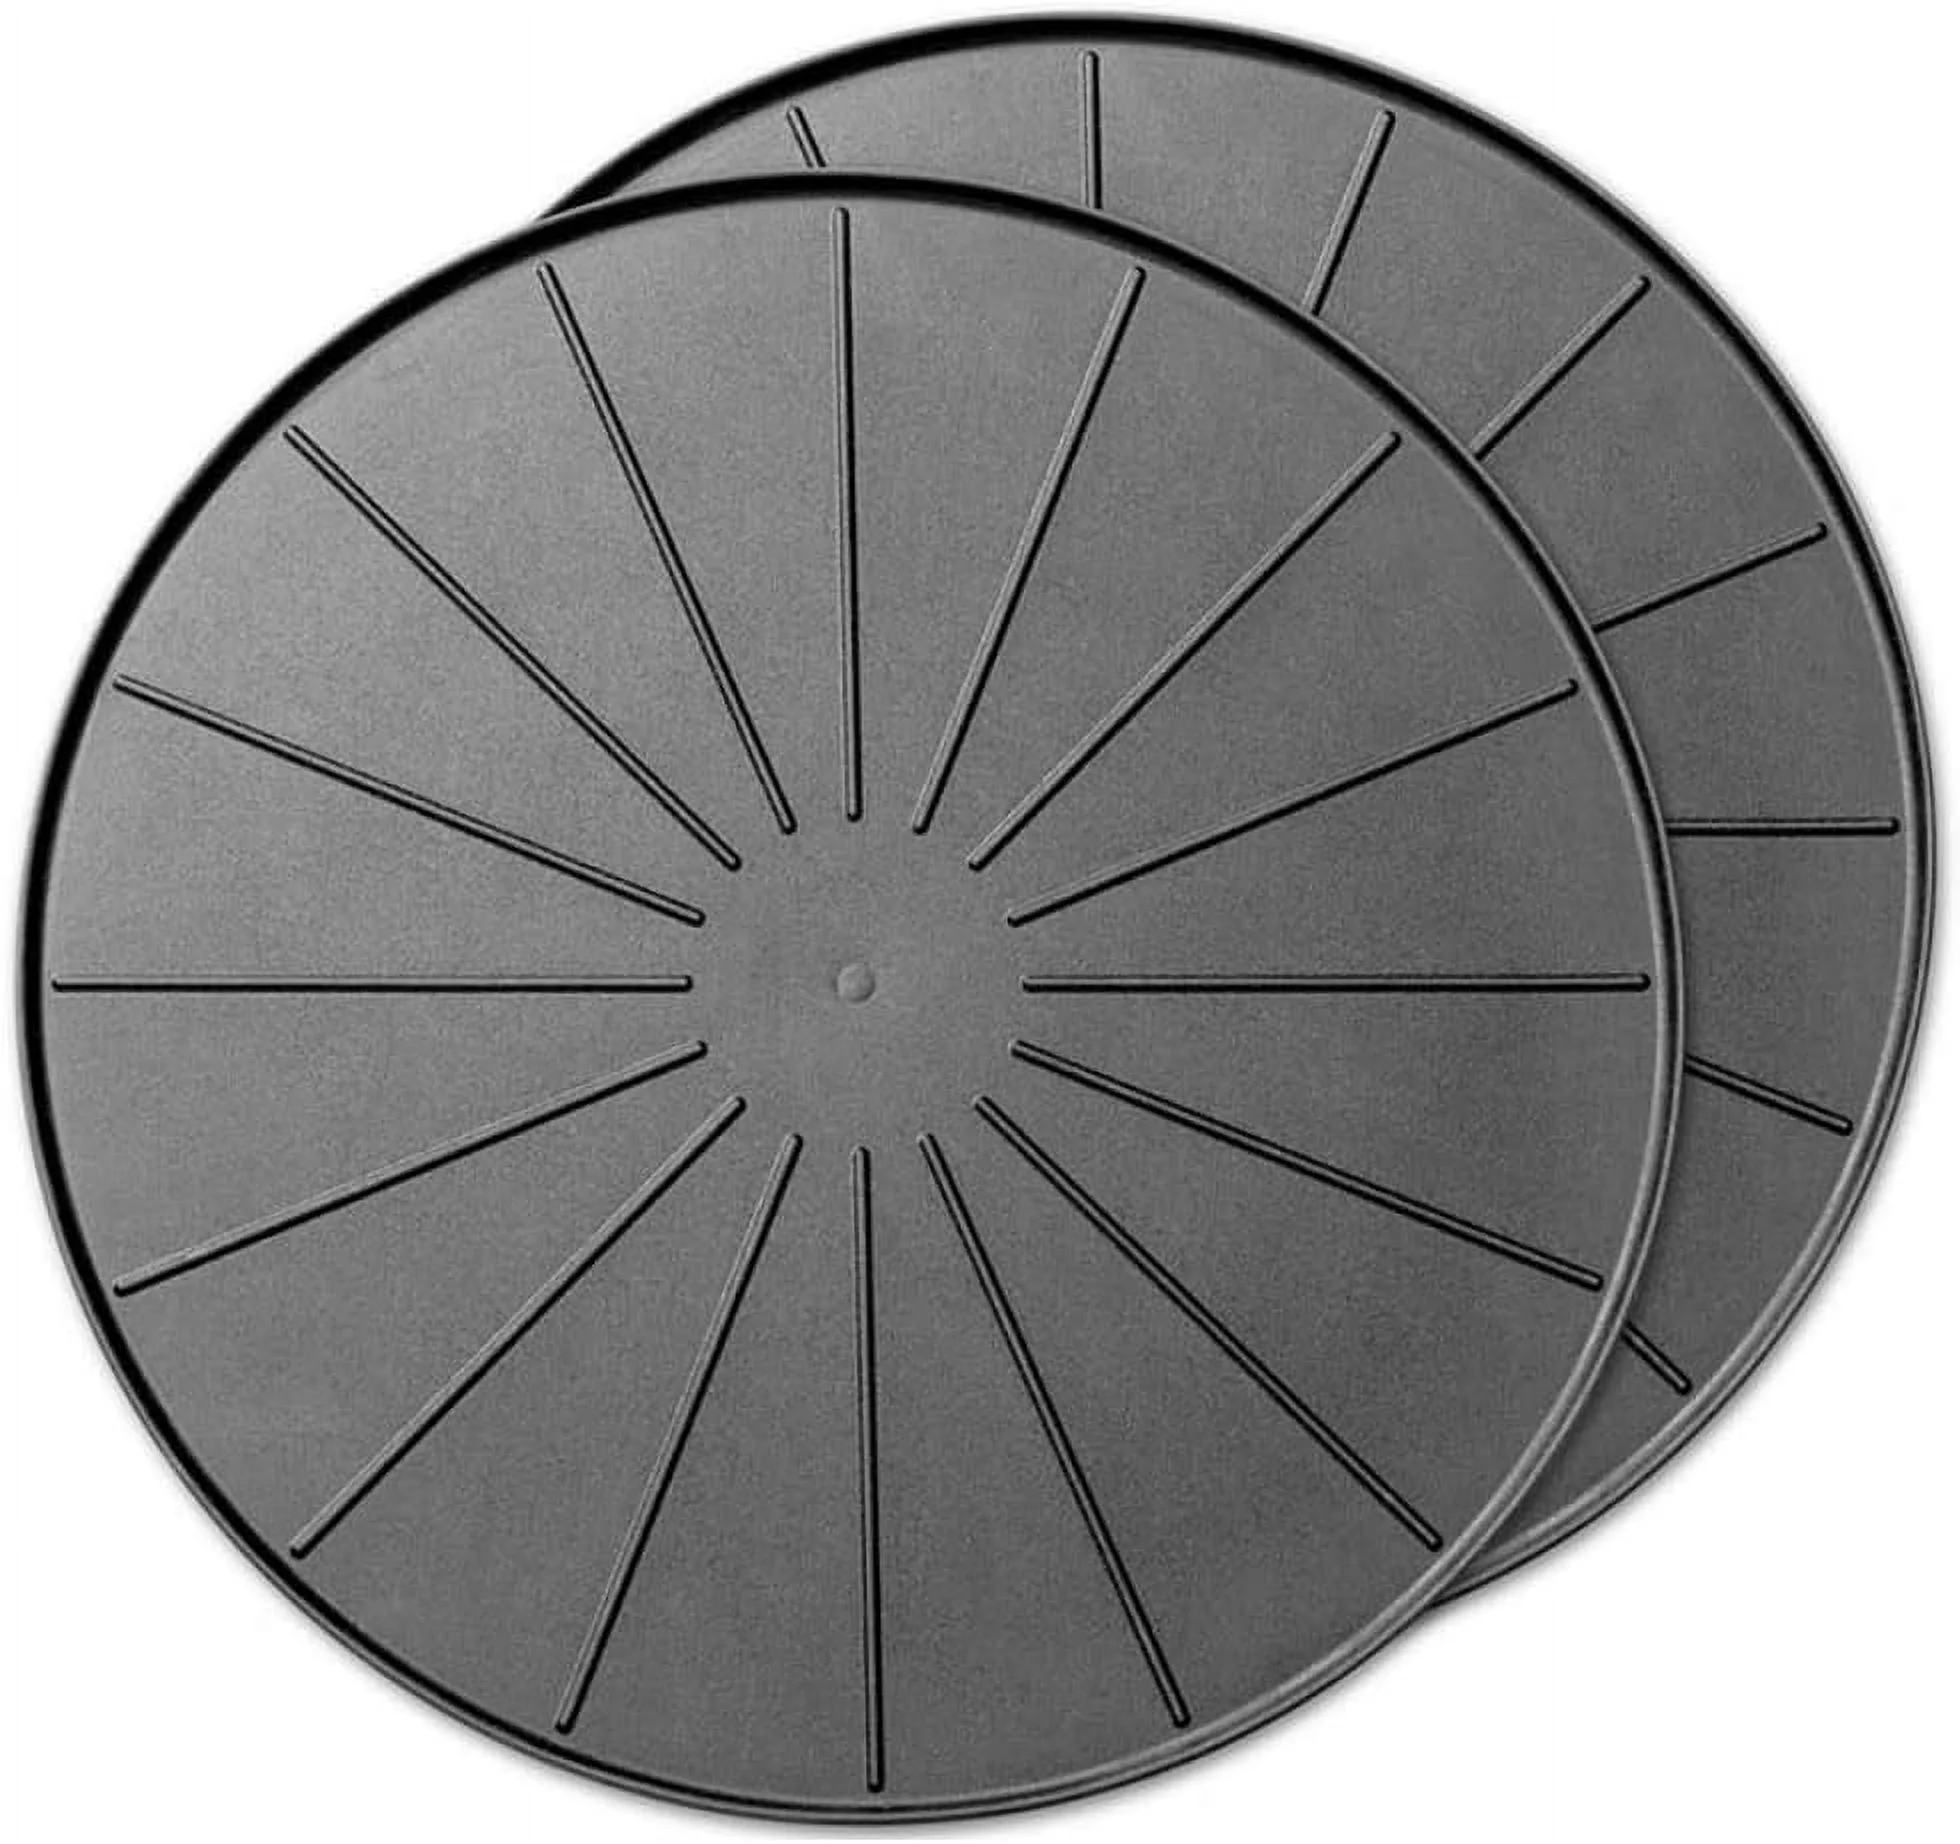 WeatherTech 15" Plant Mats / Coasters - for Floor Protection from planter spills, leaks and soil (8A15CST2PKBK)- Black (2-Pack)